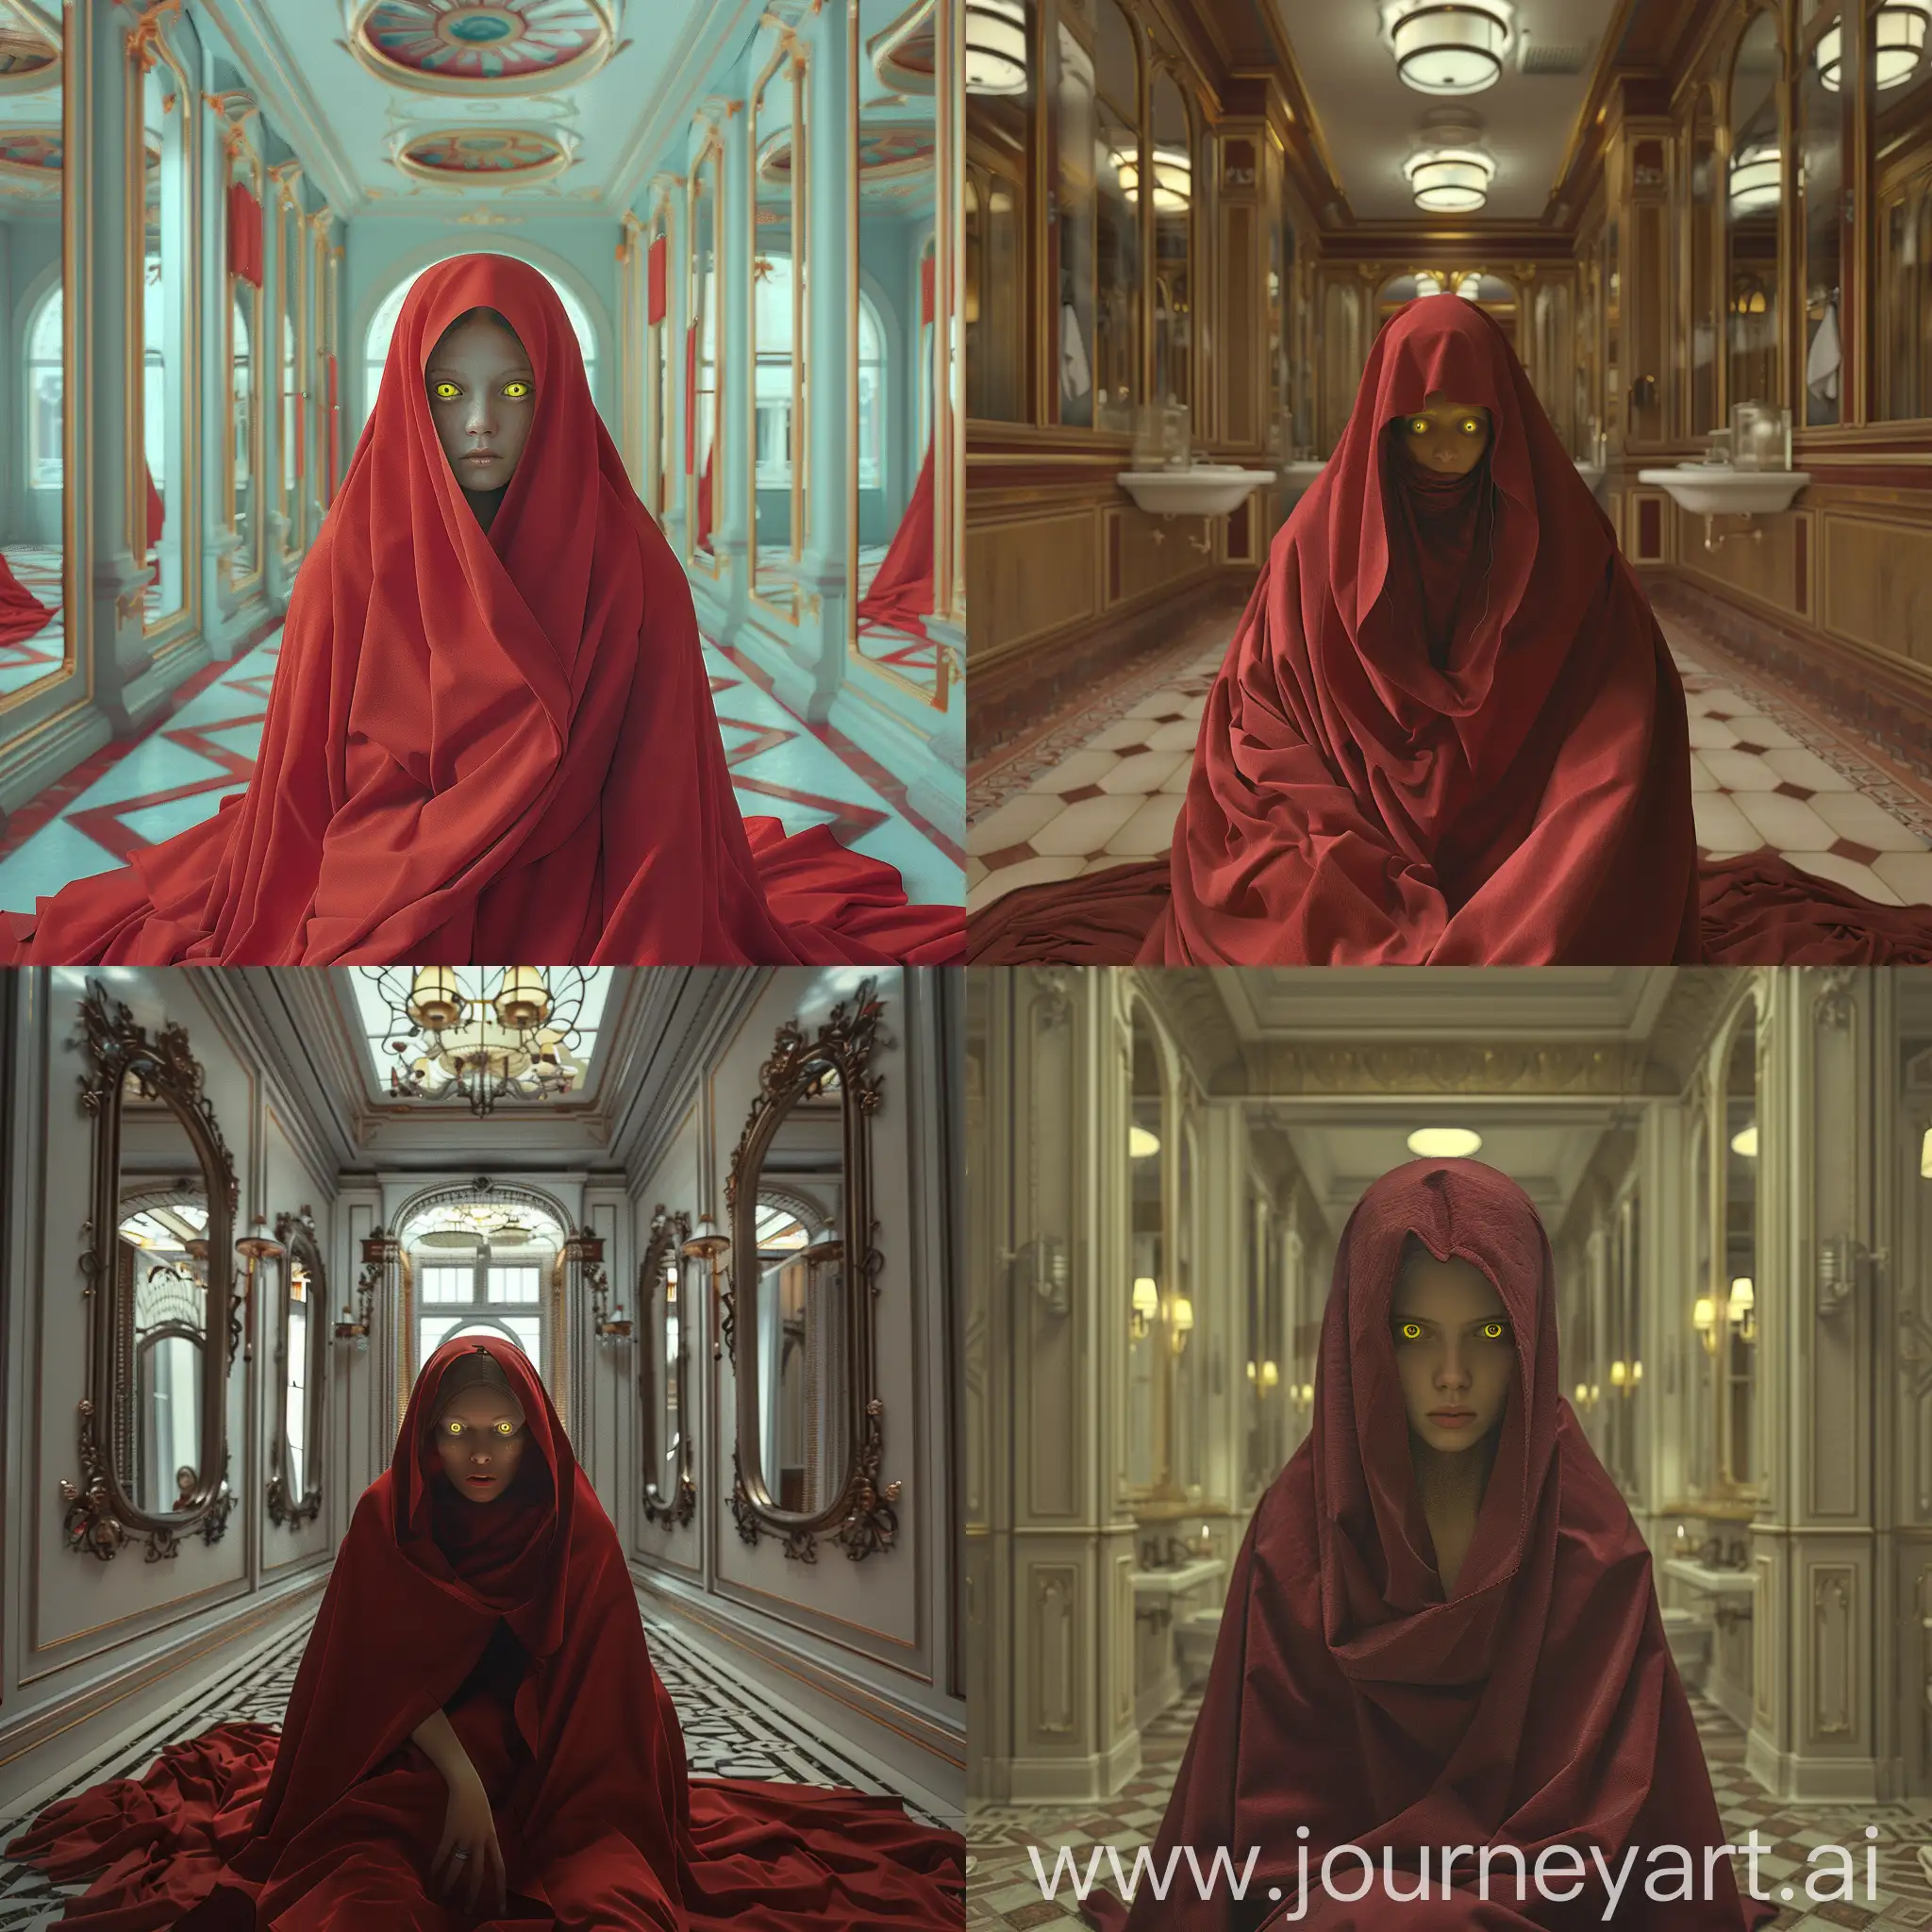 Mystical-Woman-in-Red-Cloak-Contemplating-in-Mirrored-Bathroom